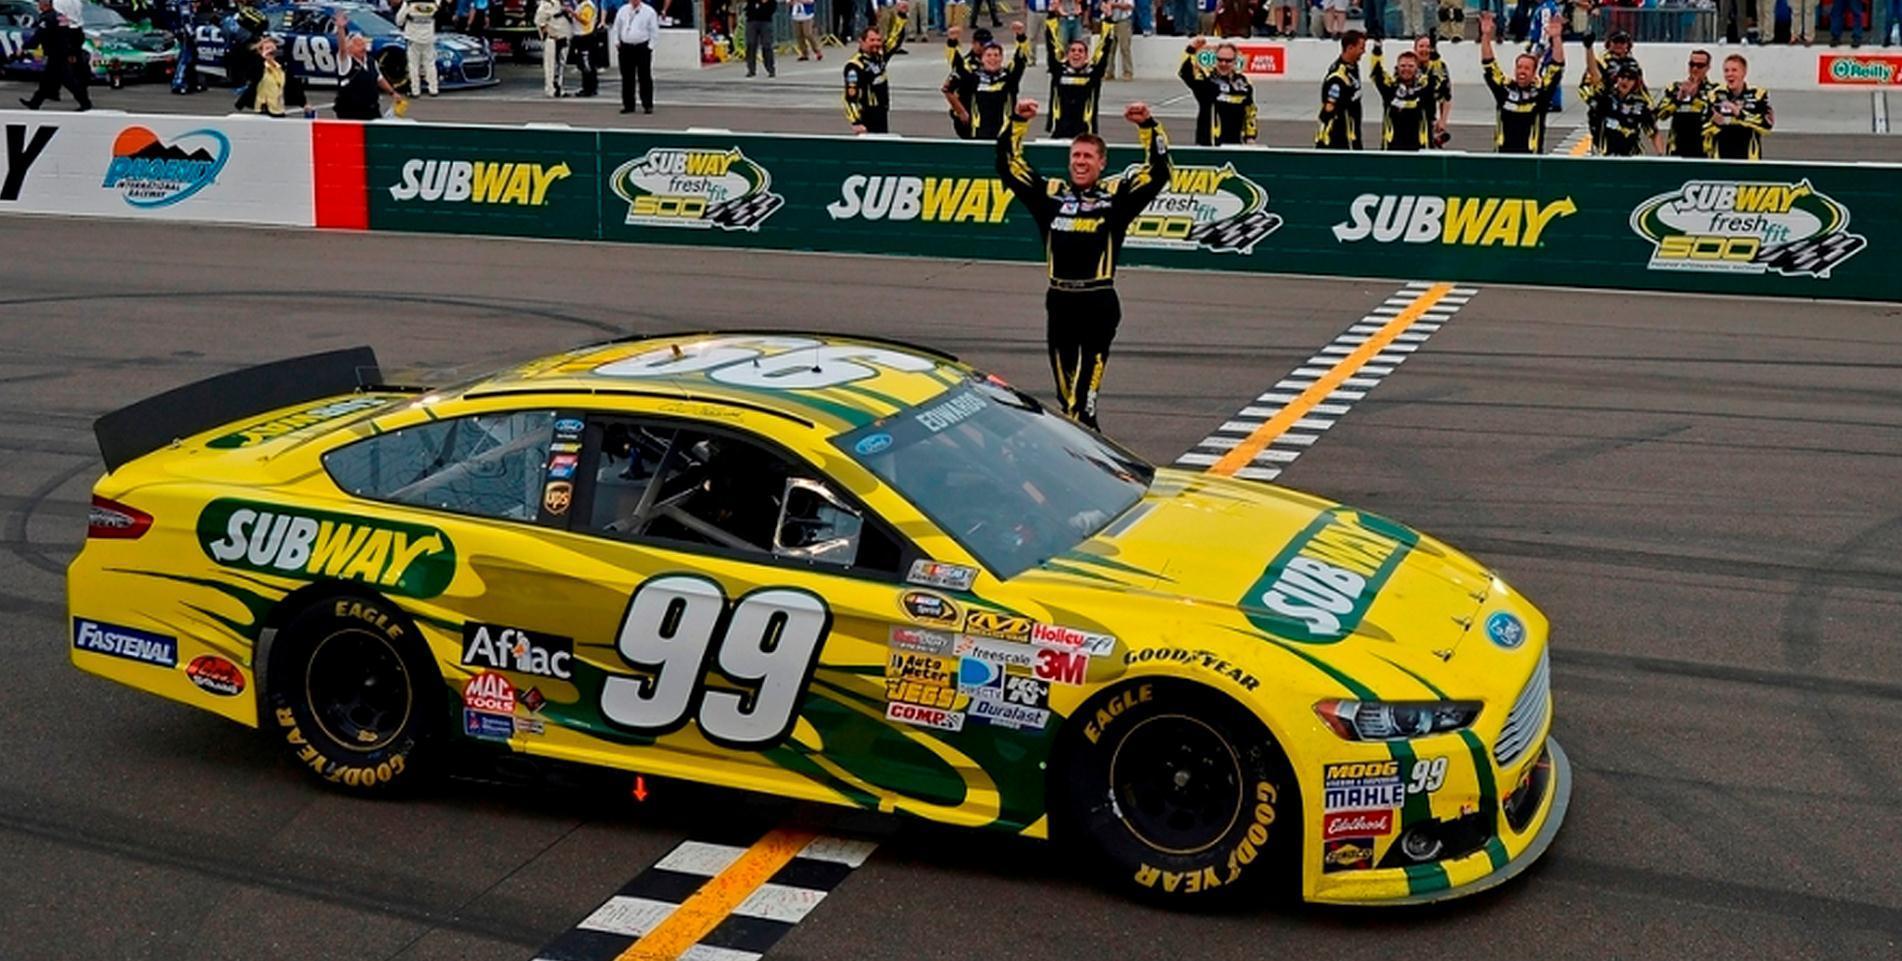 Carl Edwards With Ford Racing Wins 2013 NASCAR Sprint Cup Subway